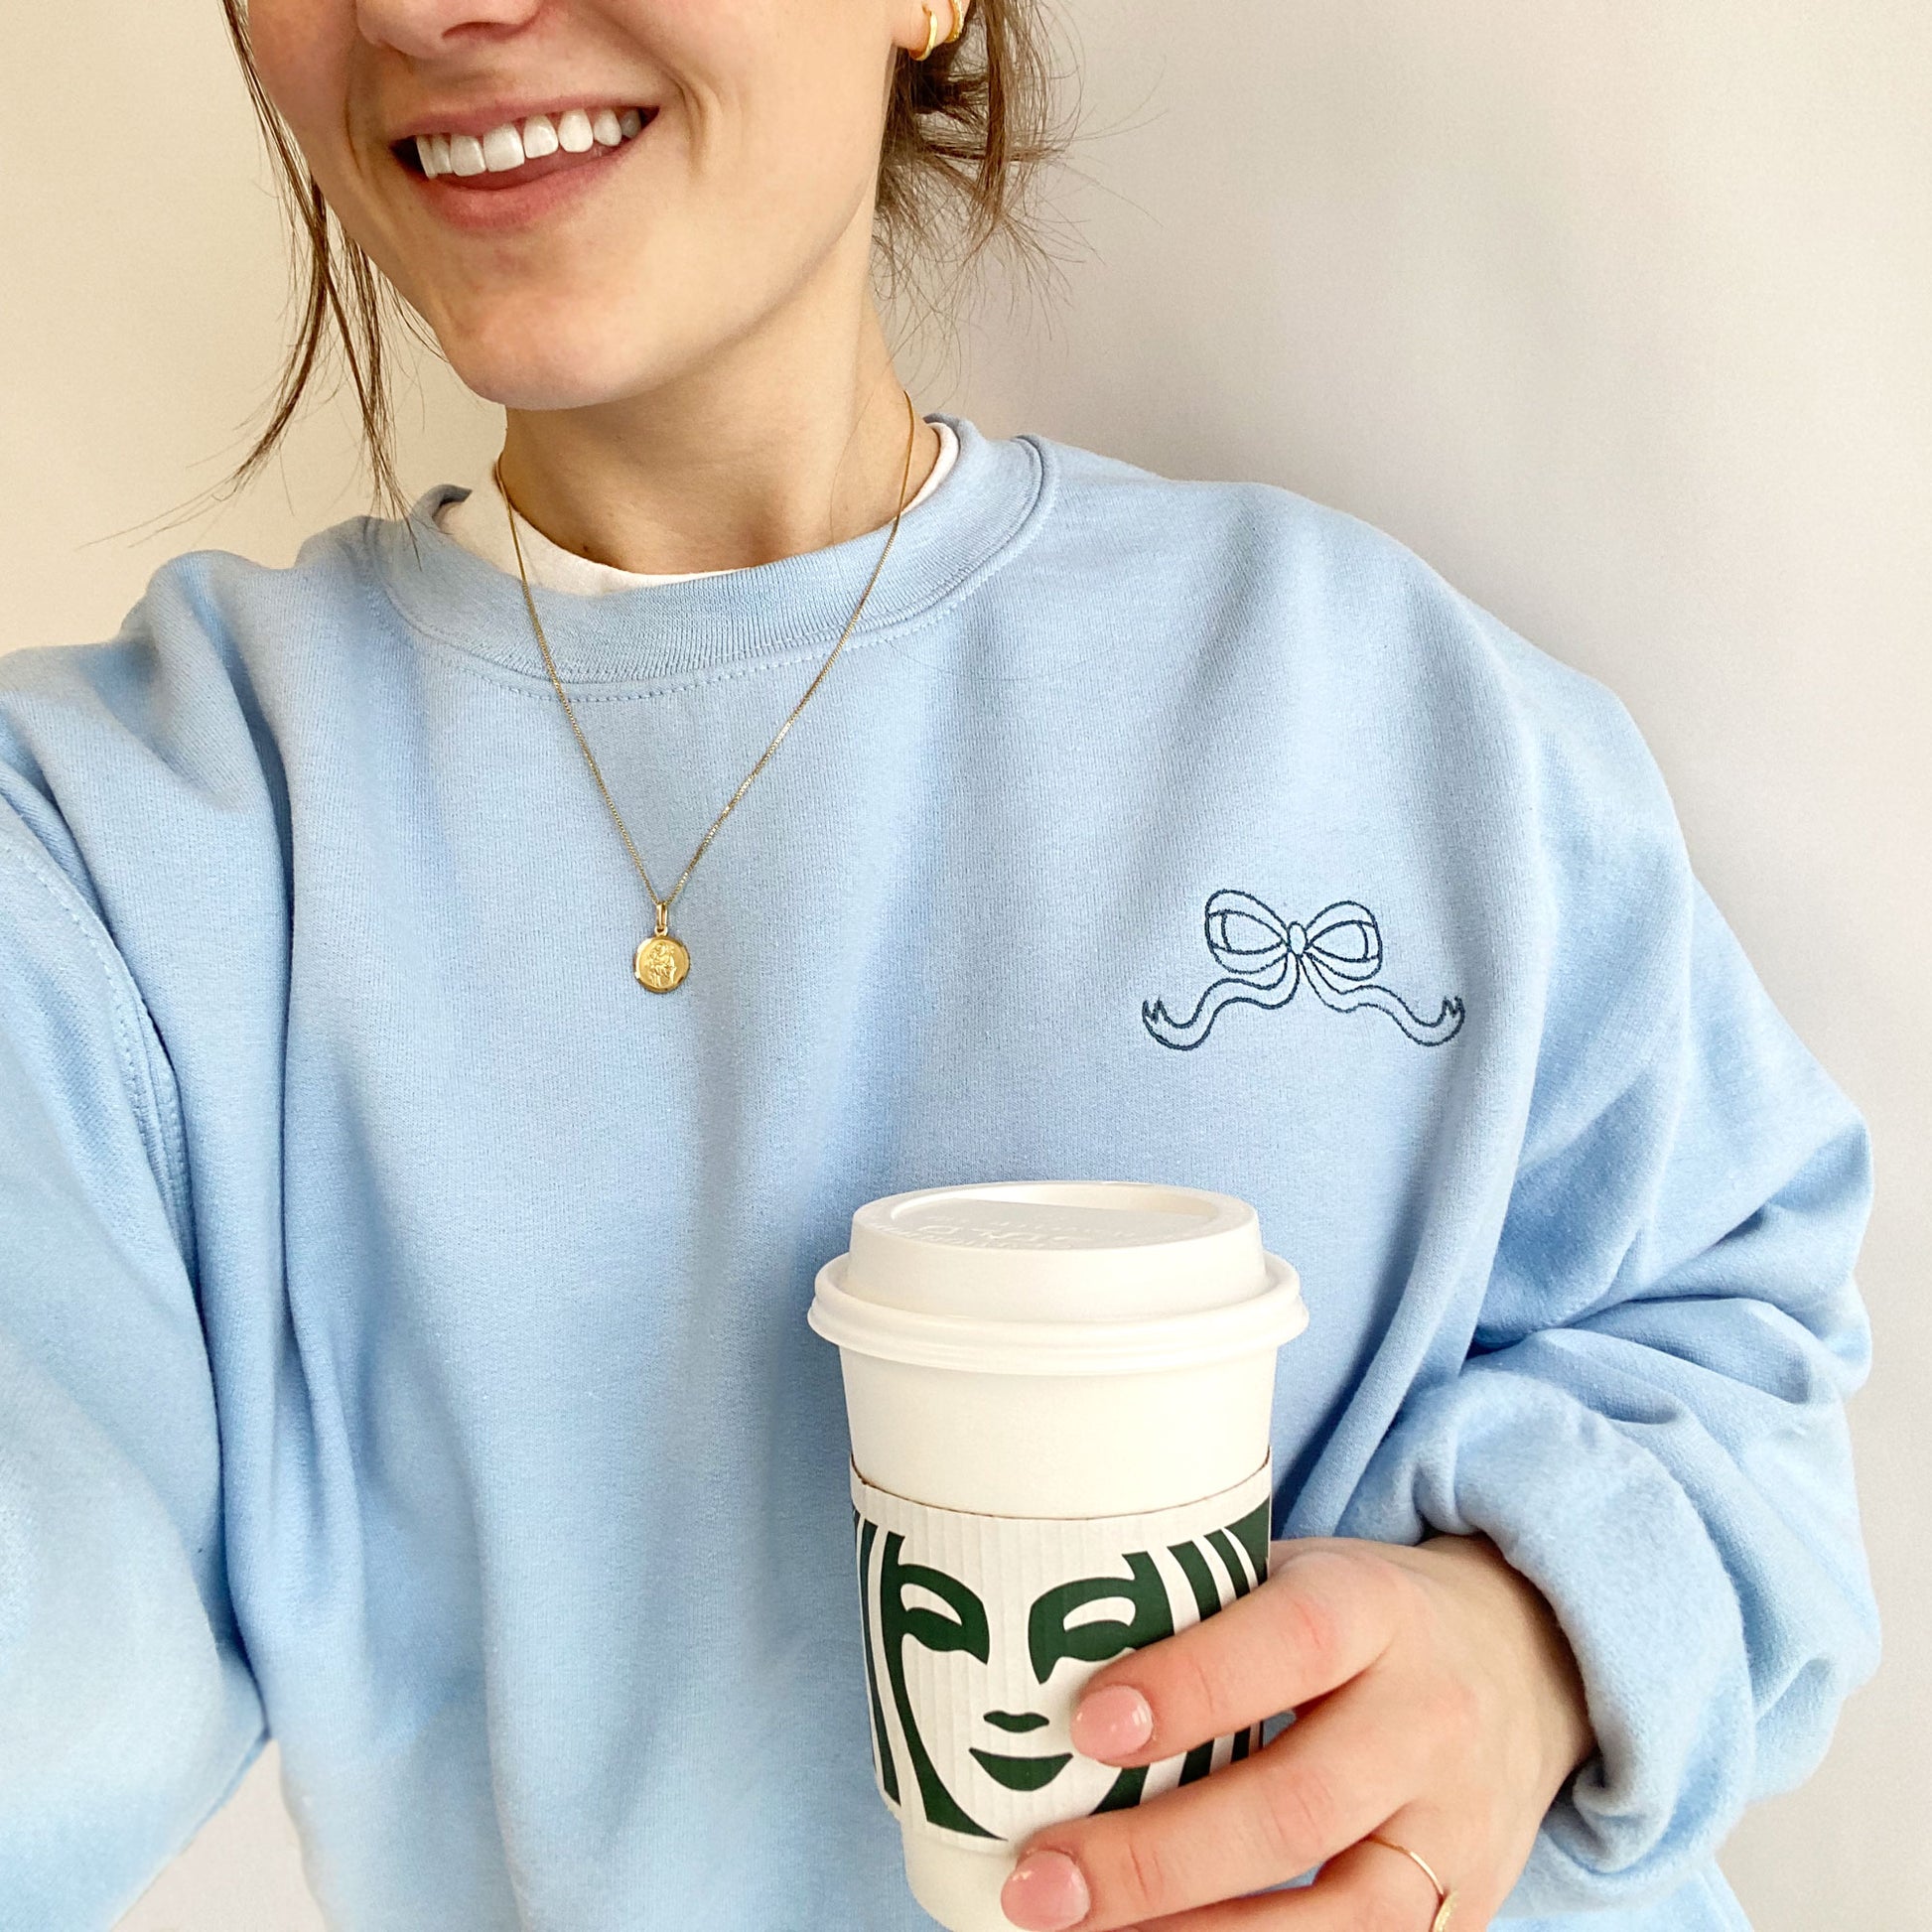 young woman wearing a light blue crewneck sweatshirt with mini outlined embroidered bow in french blue thread on the left chest